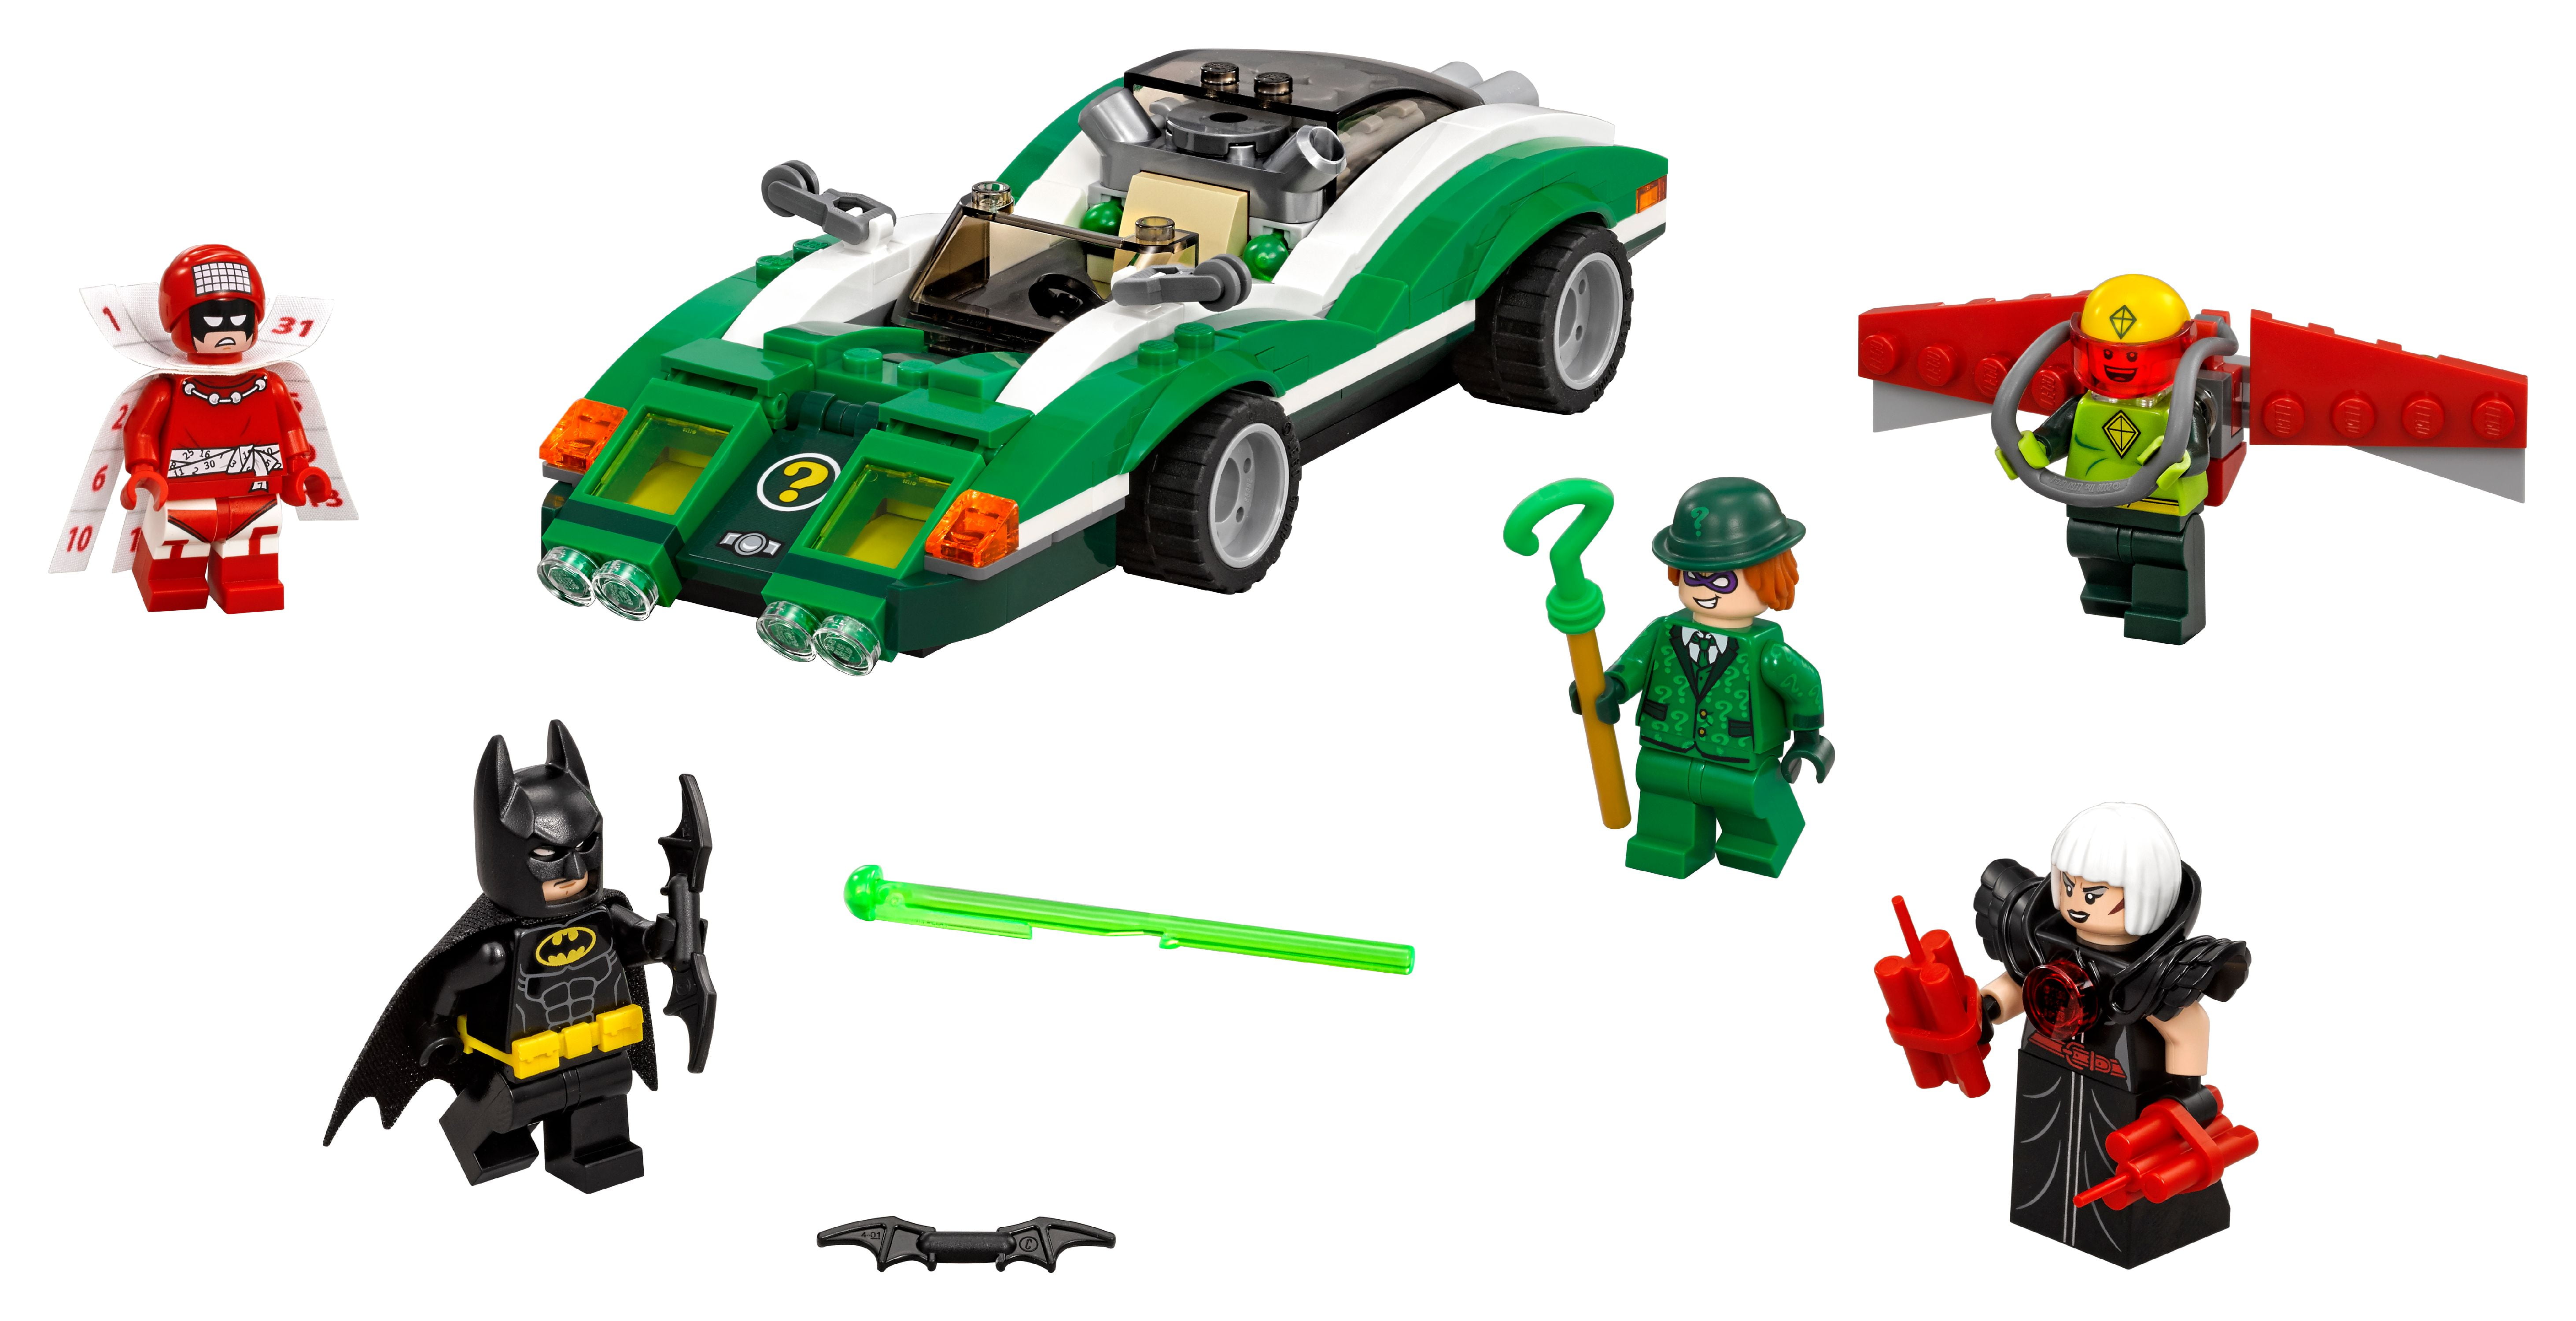 The Batman Lego sets offer a look at the Riddler before new